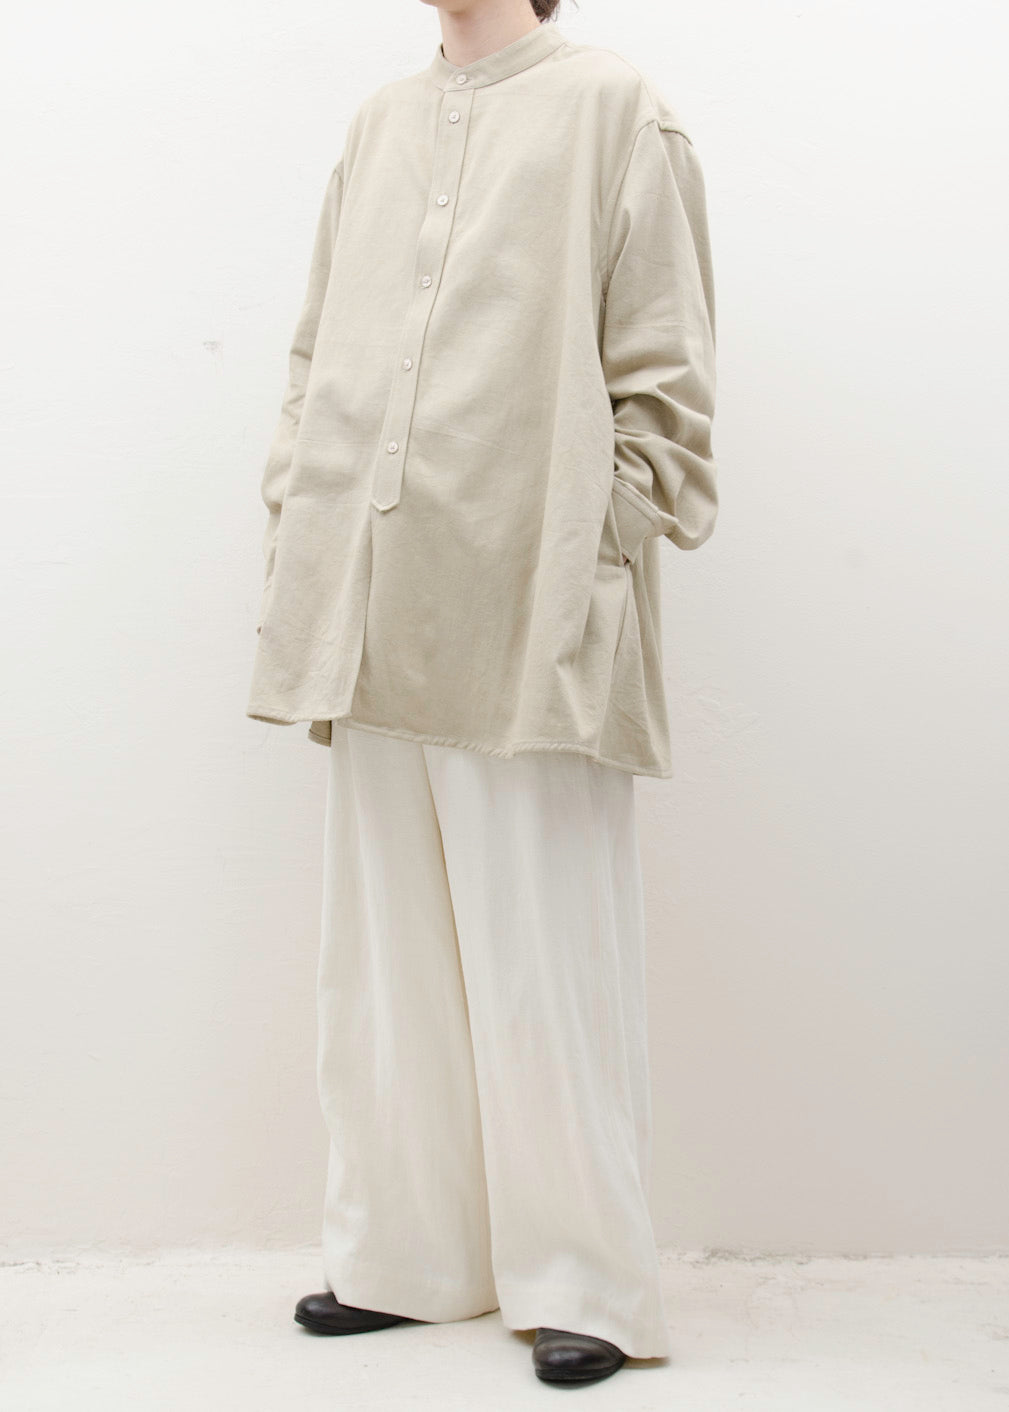 HED MAYNER ELONGATED TROUSERS / BLANC STONE